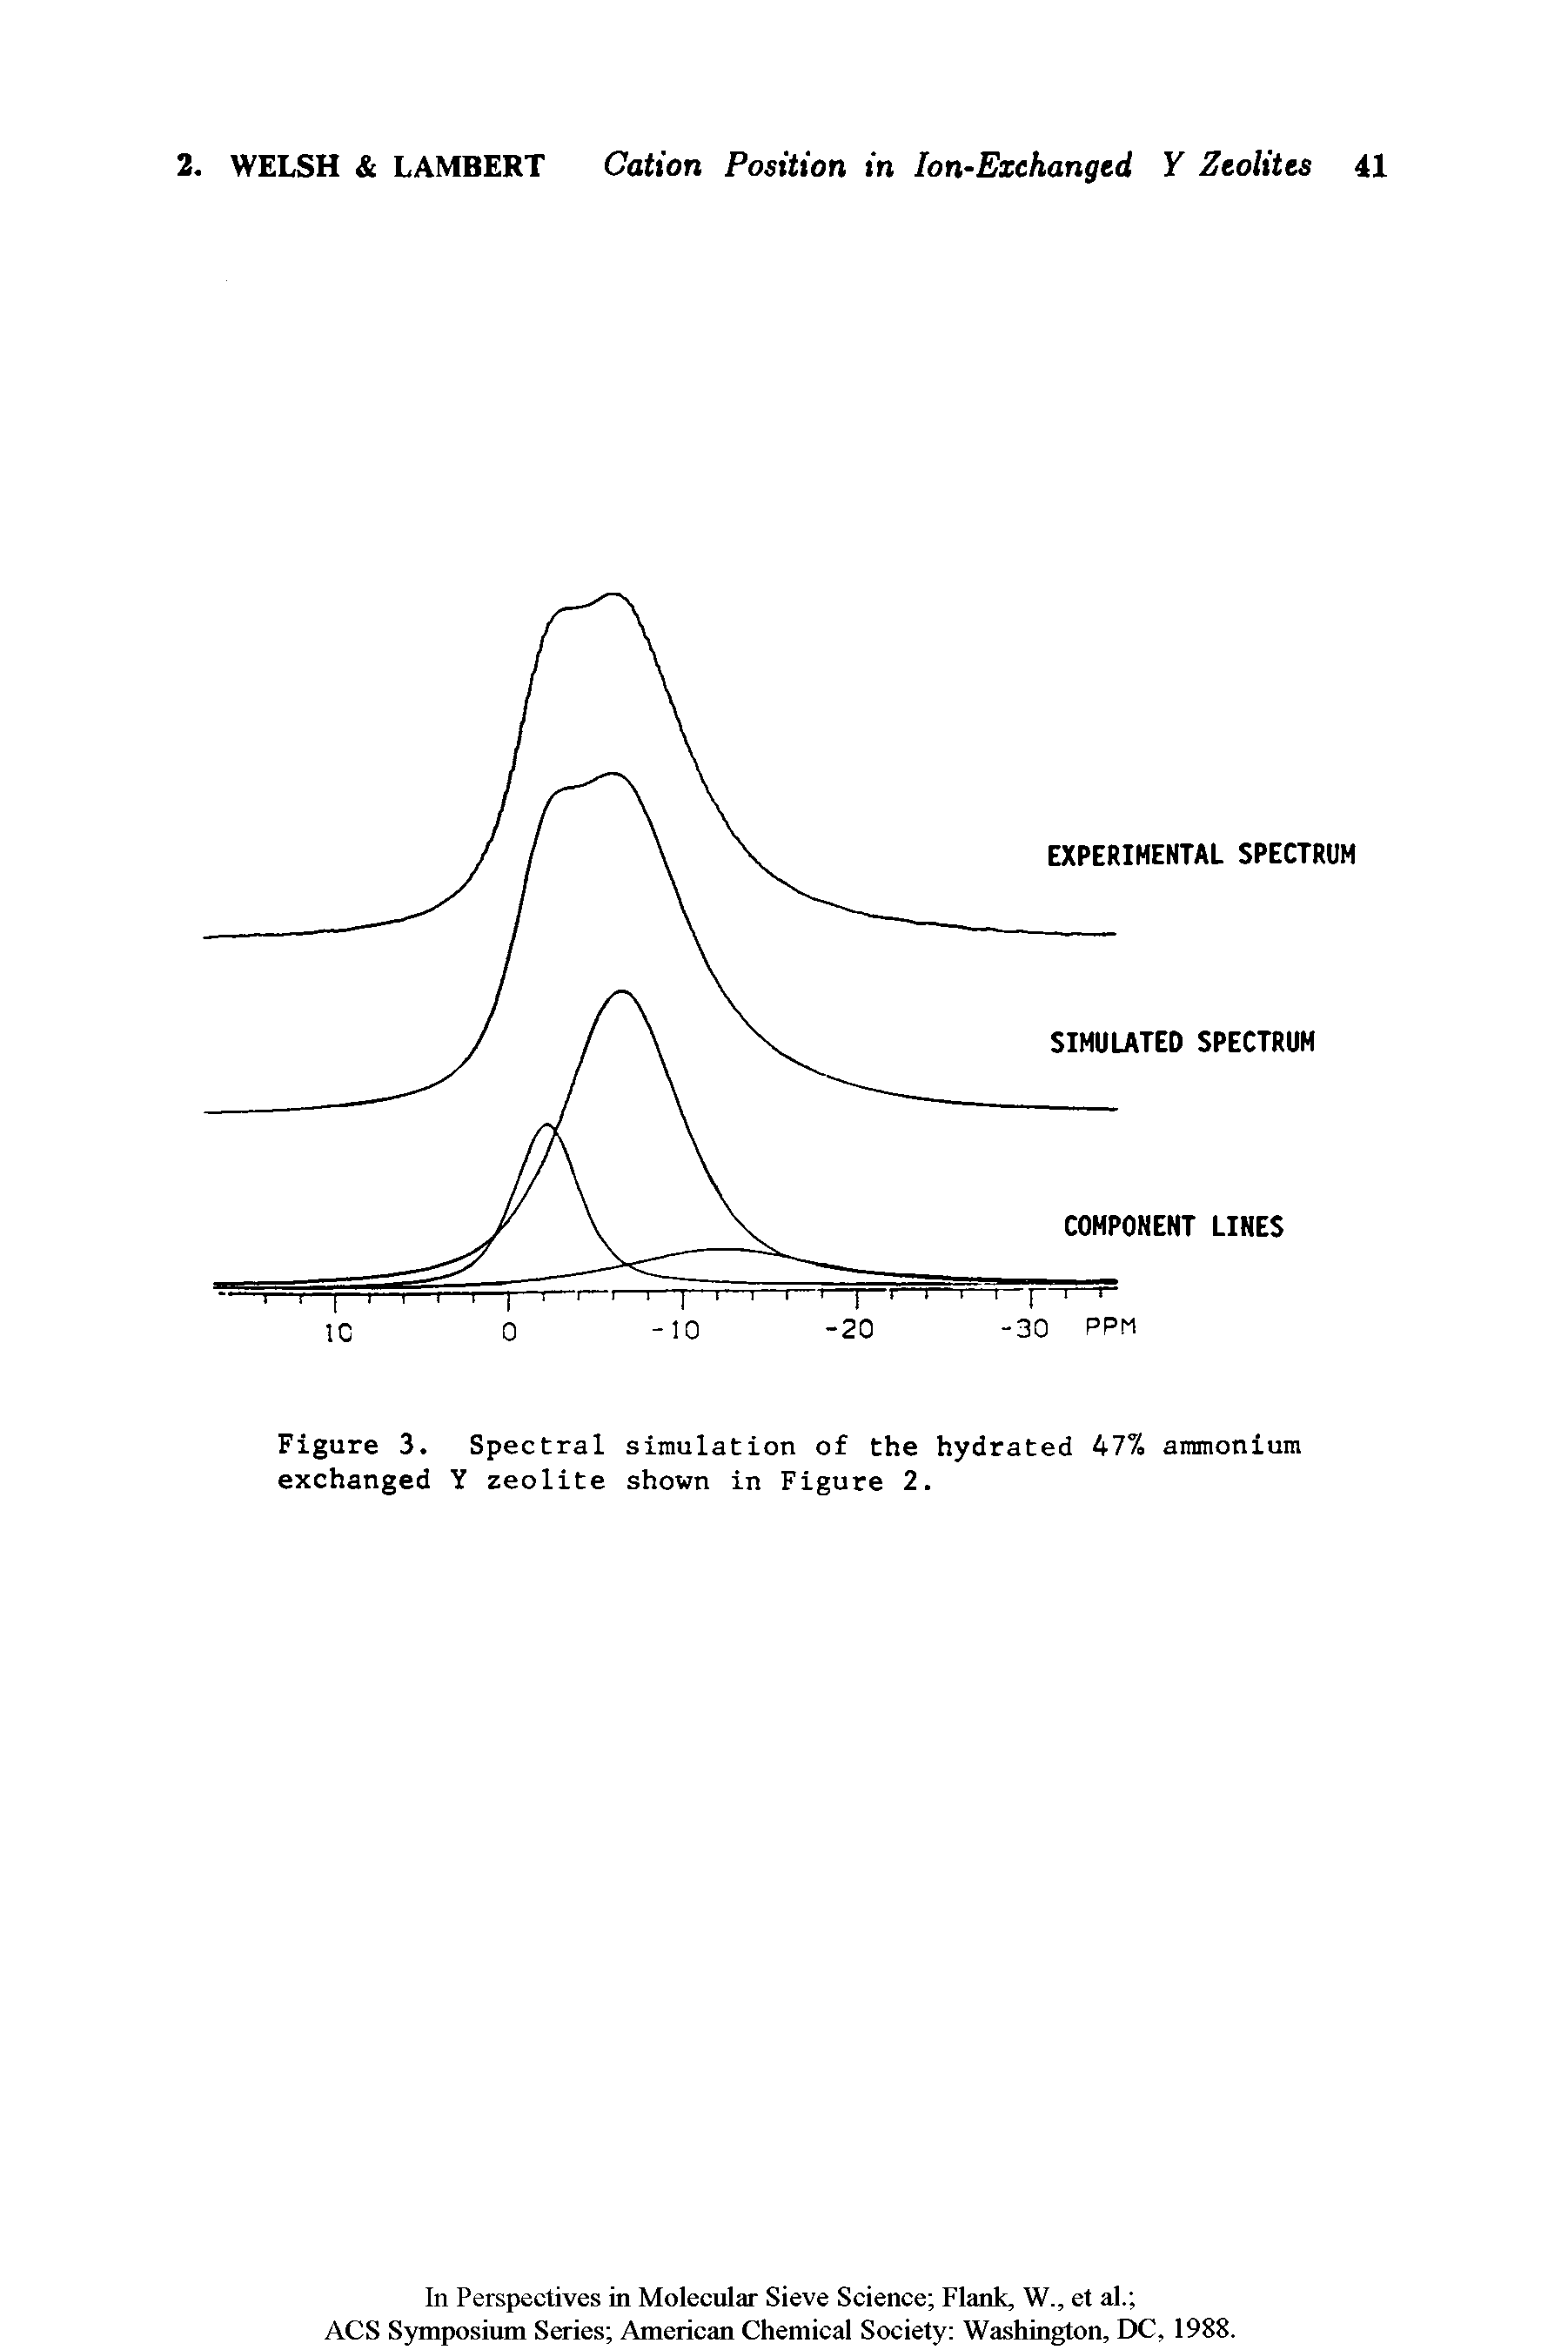 Figure 3. Spectral simulation of the hydrated 477. ammonium exchanged Y zeolite shown in Figure 2.